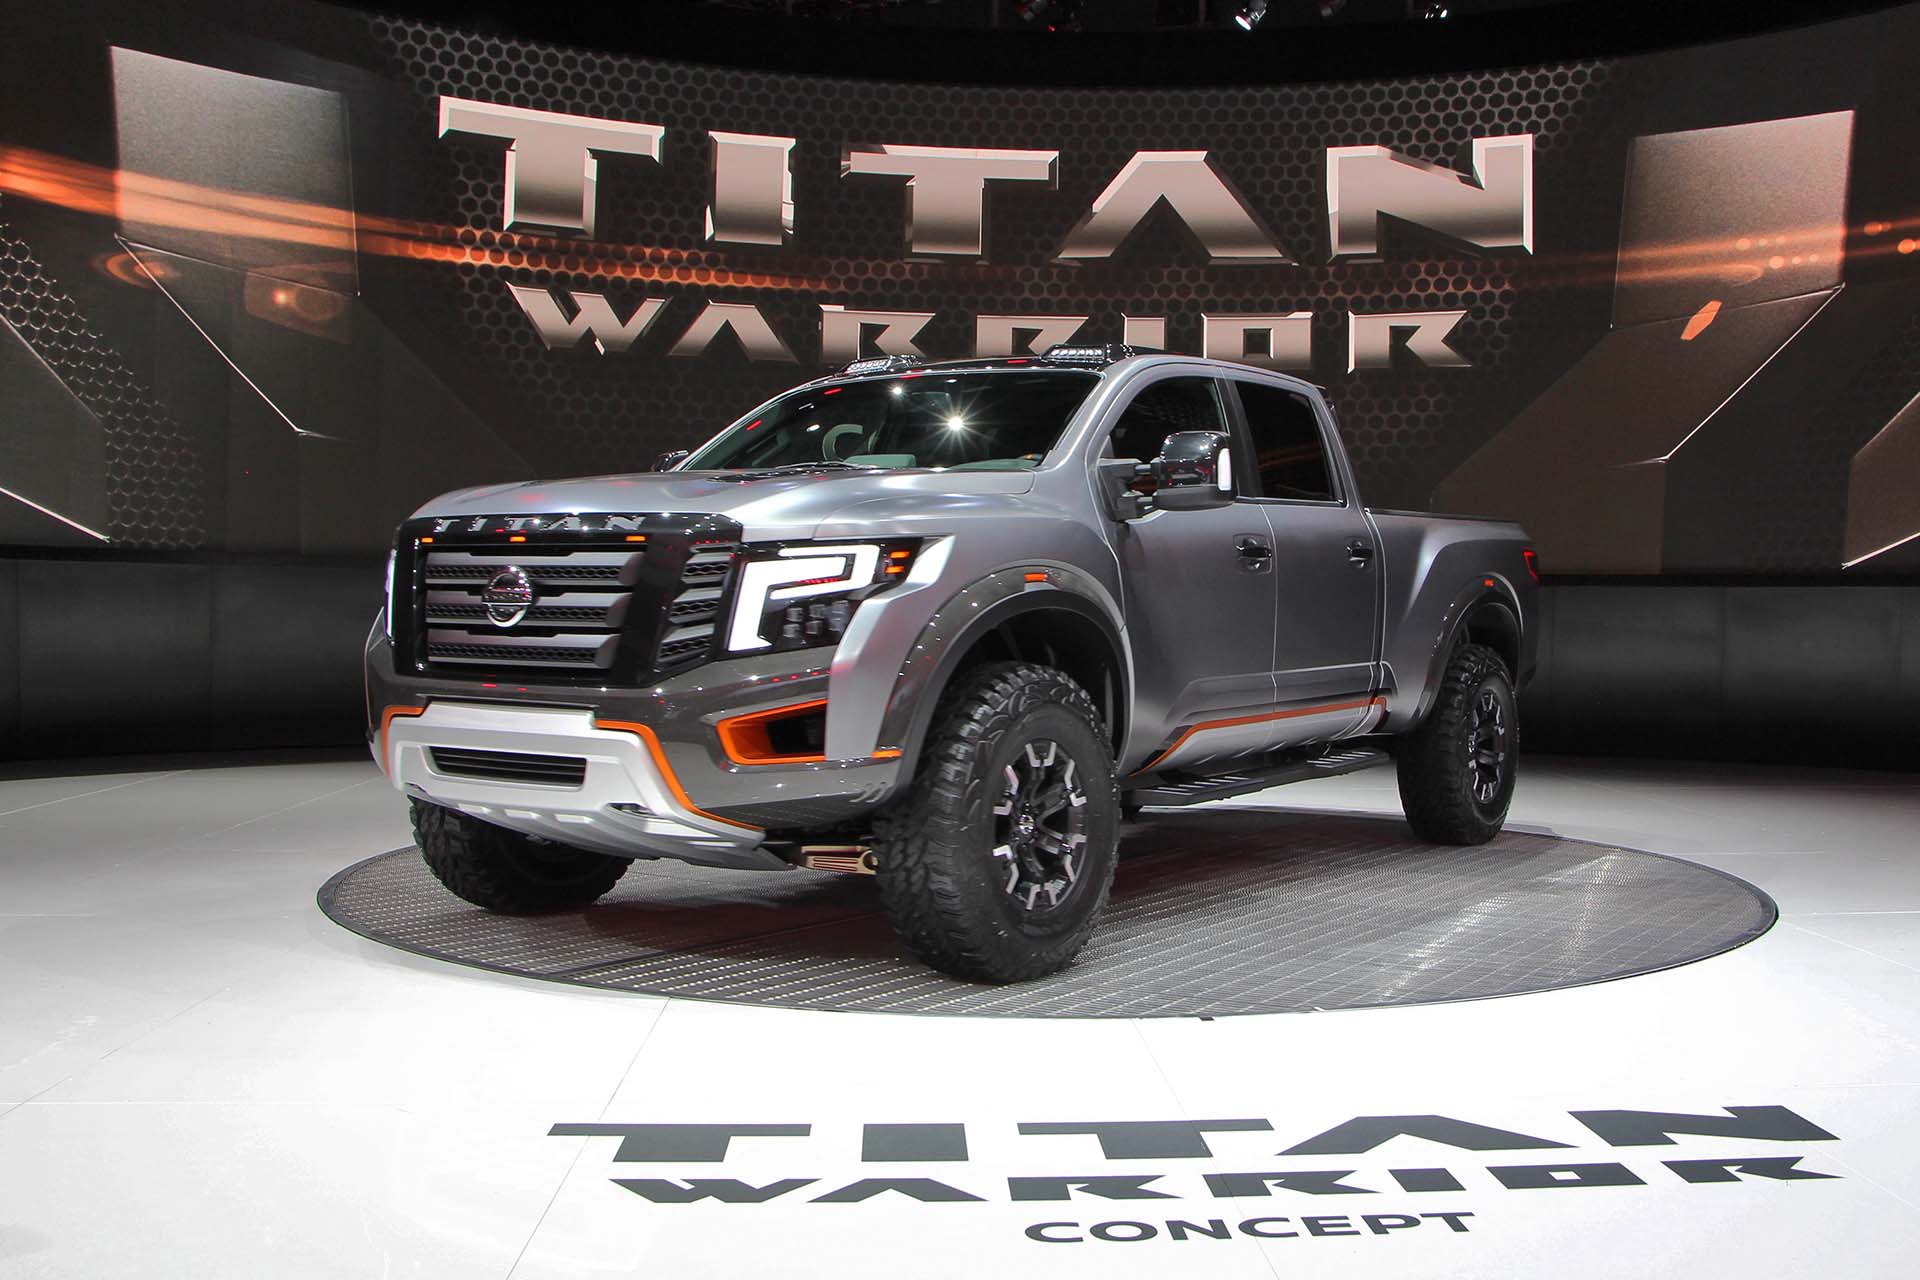 We imagine the designers at Nissan looked at their handiwork and thought: Yes, it's called the Titan. Yes, it's got a diesel engine. But is it hardcore enough? Well, mission accomplished, Nissan – the Titan Warrior concept looks ready for the zombie apocalypse (and will haul six months of supplies to boot).